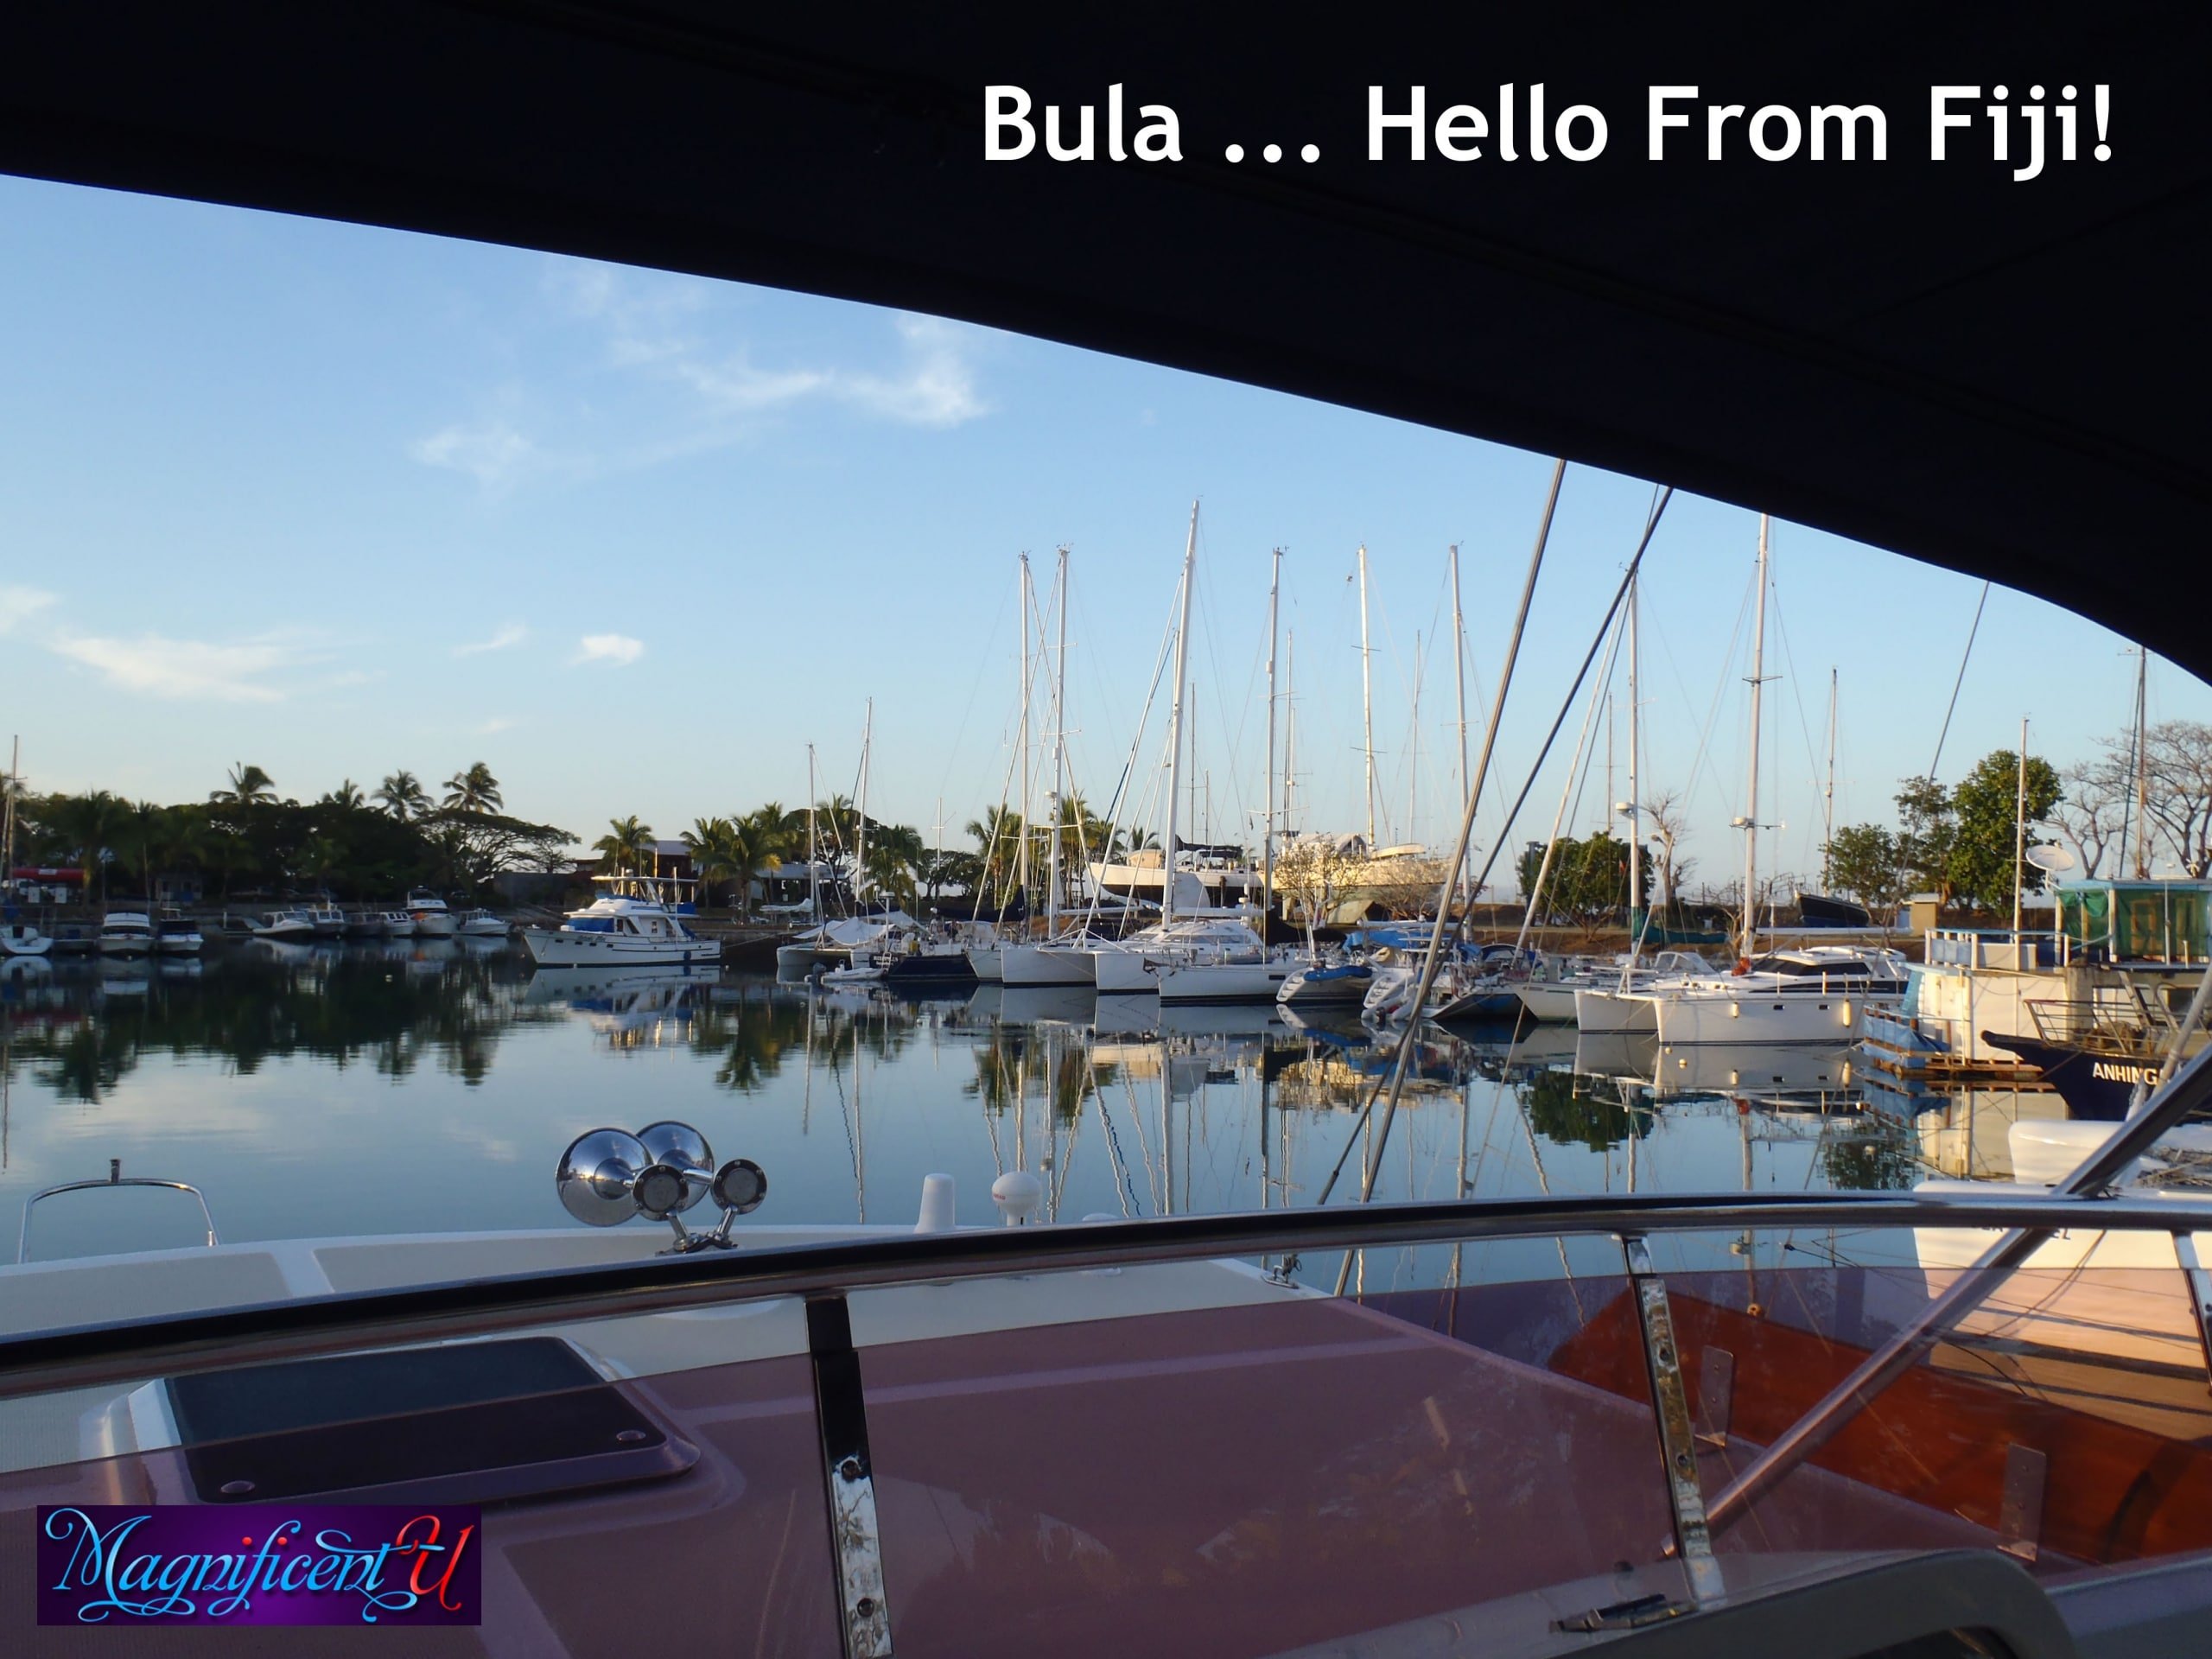 Bula Hello From Fiji South Pacific On a Yacht